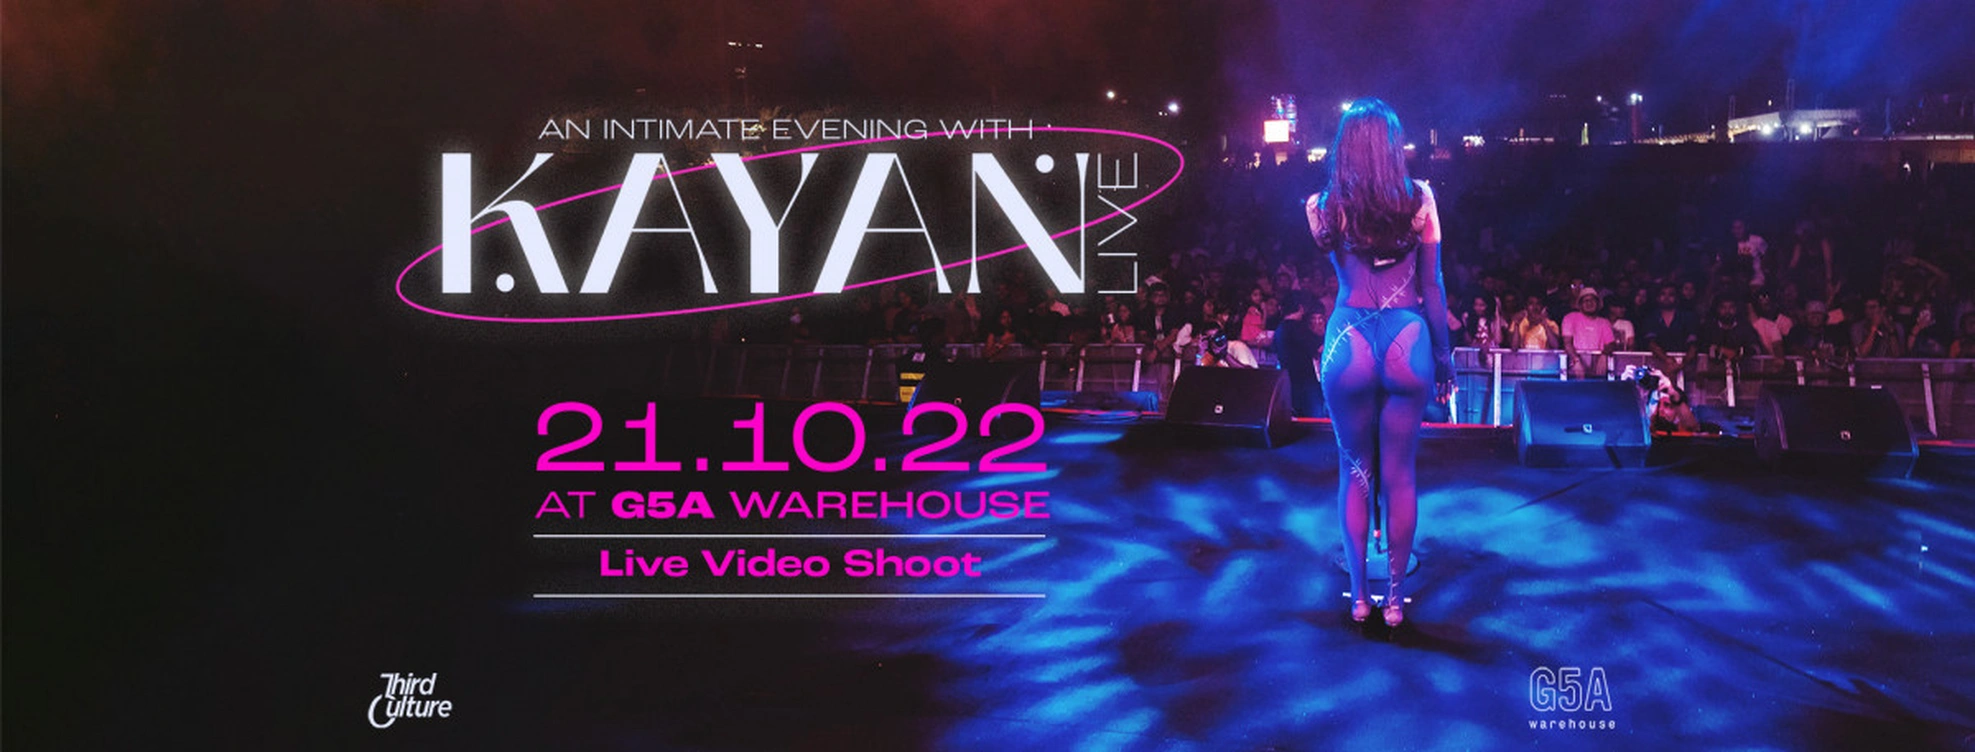 An intimate evening with Kayan (Live)